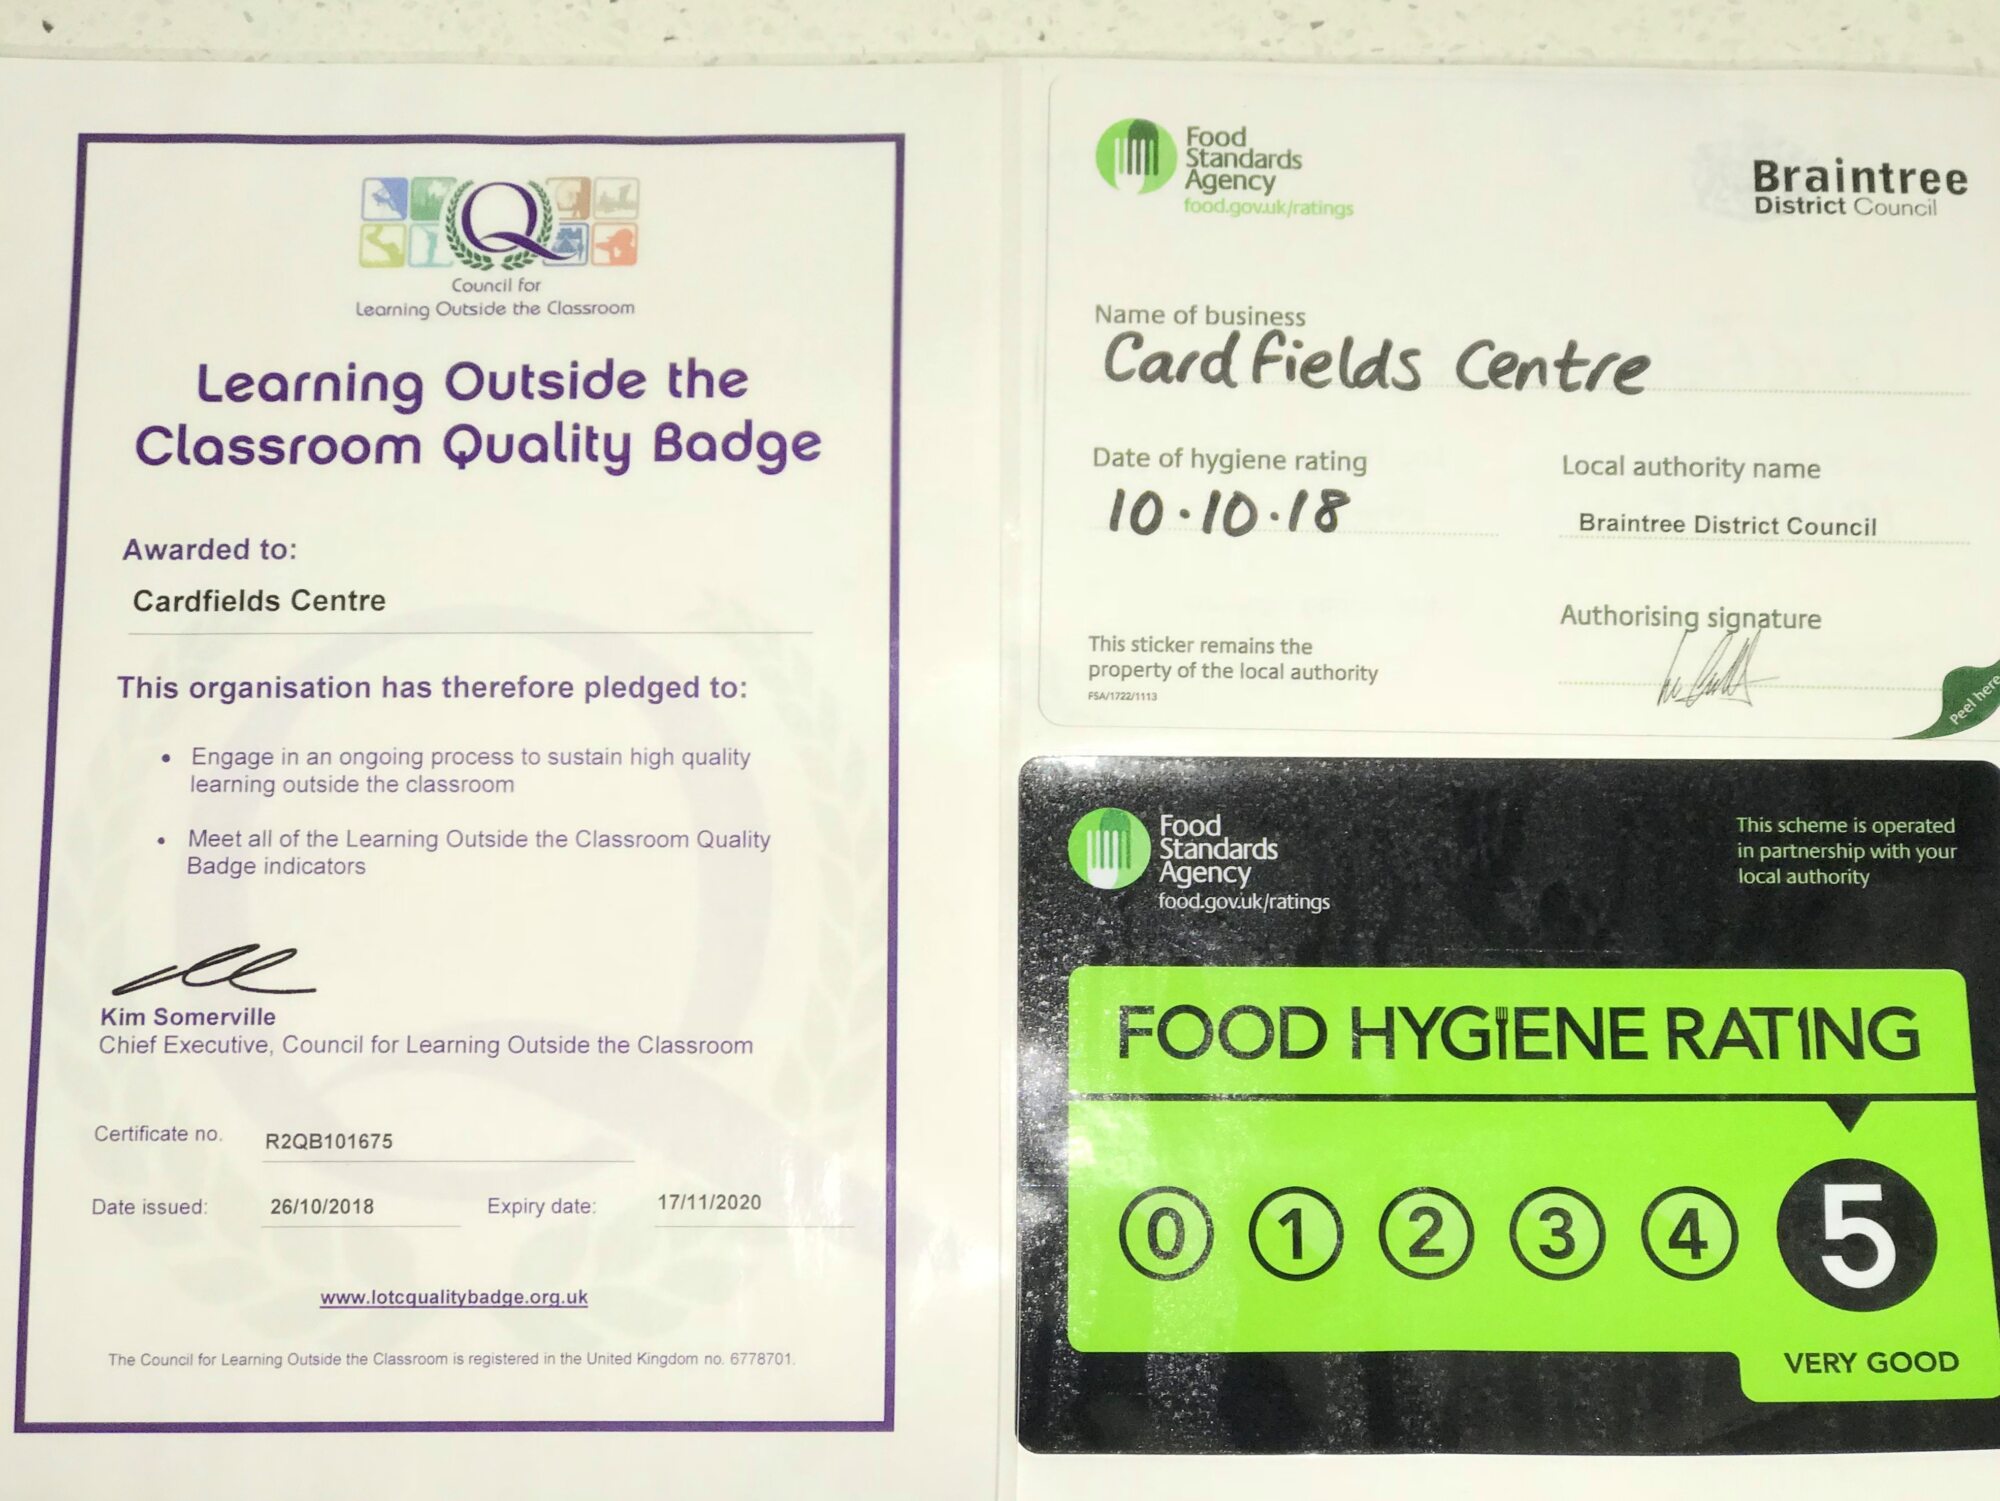 Photo of certificates and food hygiene rating